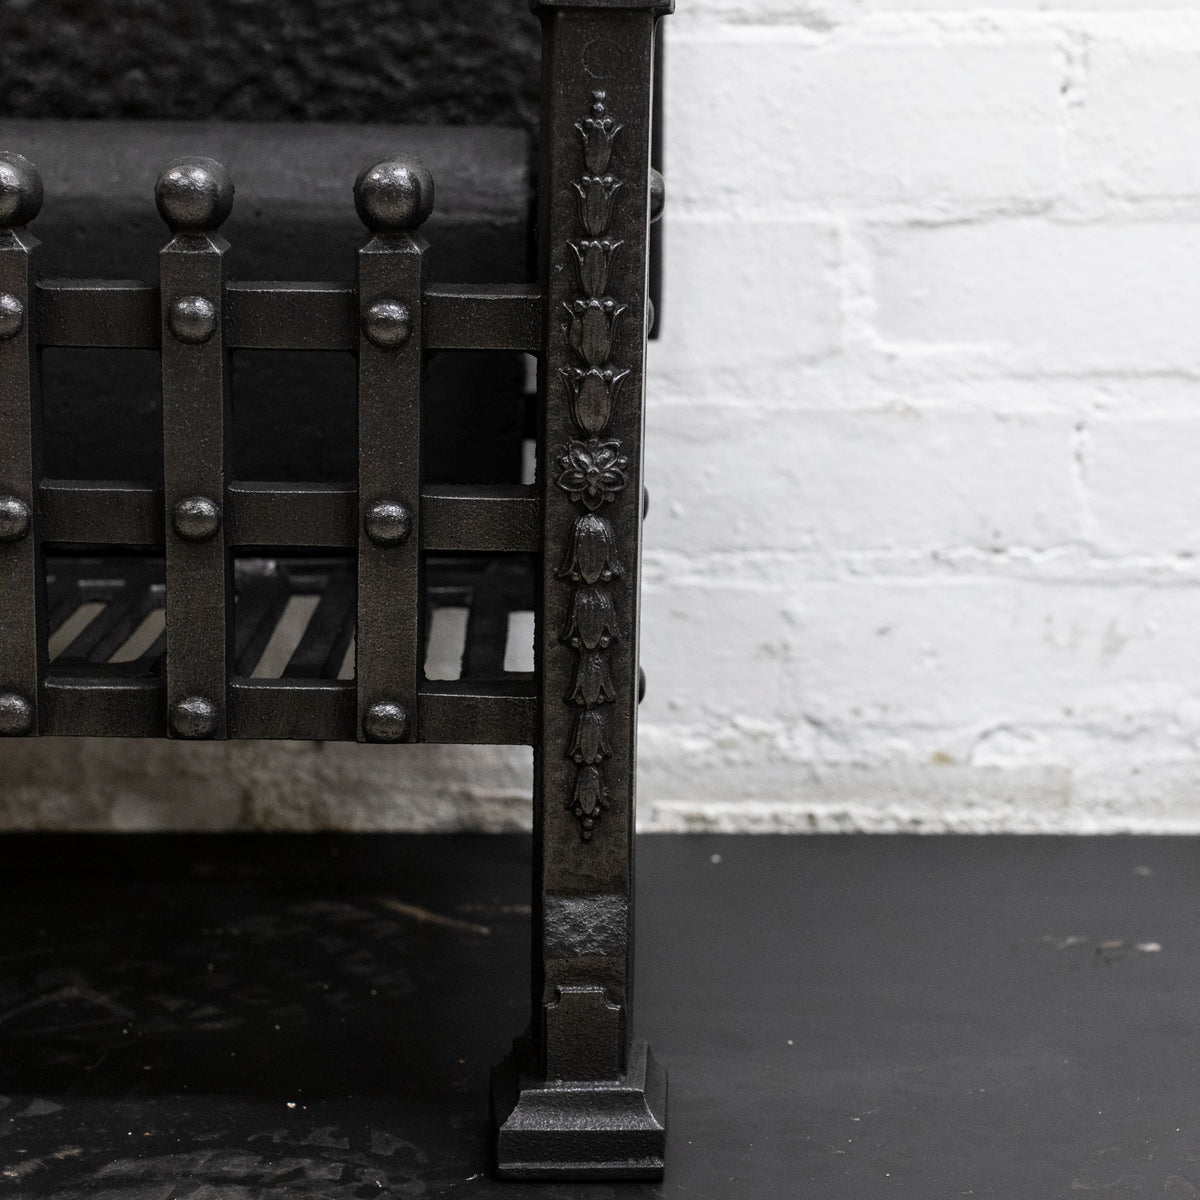 Reclaimed Cast Iron Fire Basket with Griffin | The Architectural Forum